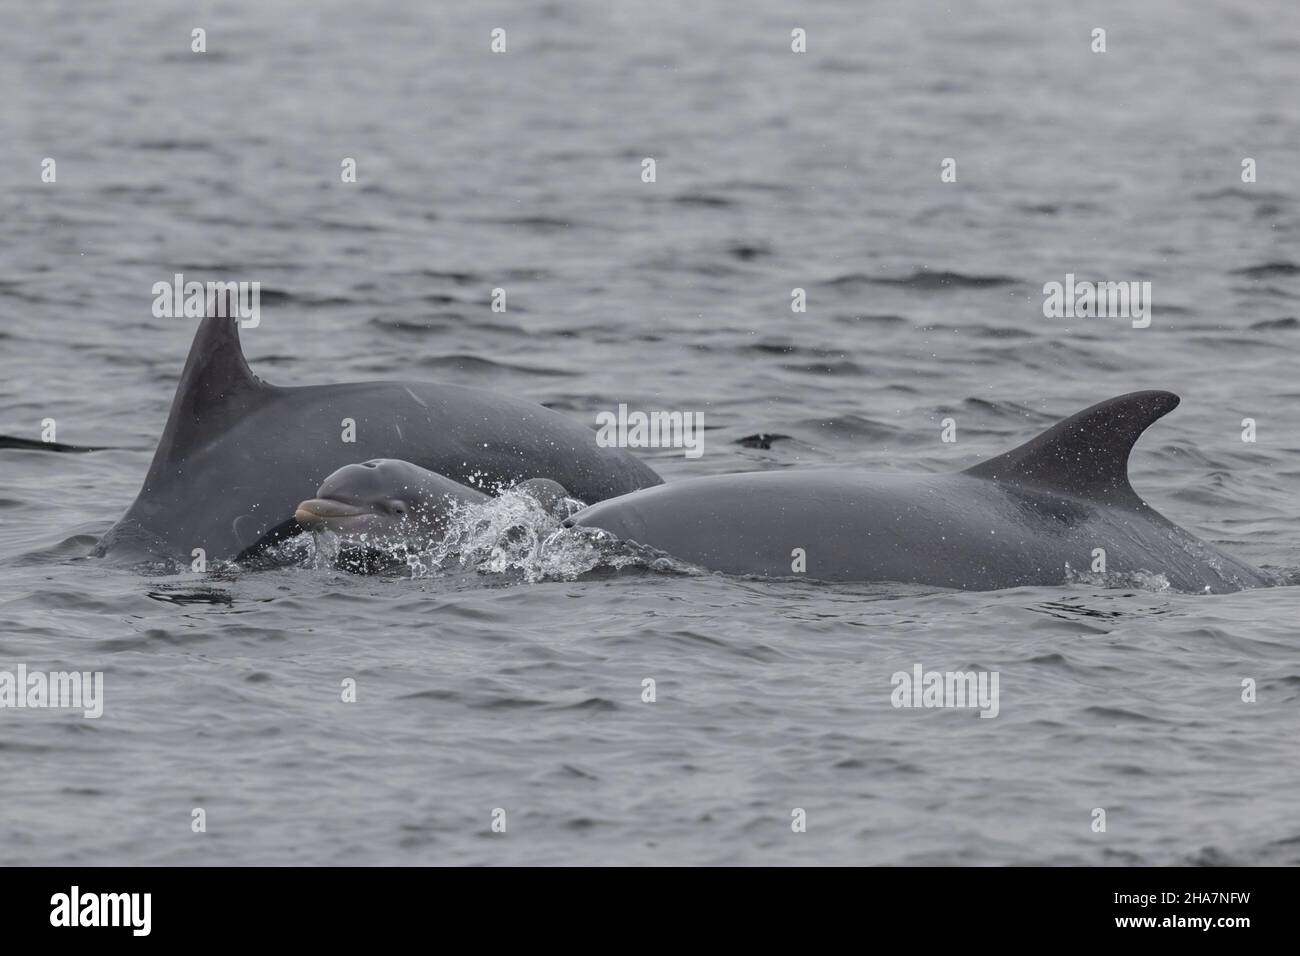 Neonate Bottlenose dolphin (approx 1 week old) chaperoned by two adult dolphins. Stock Photo